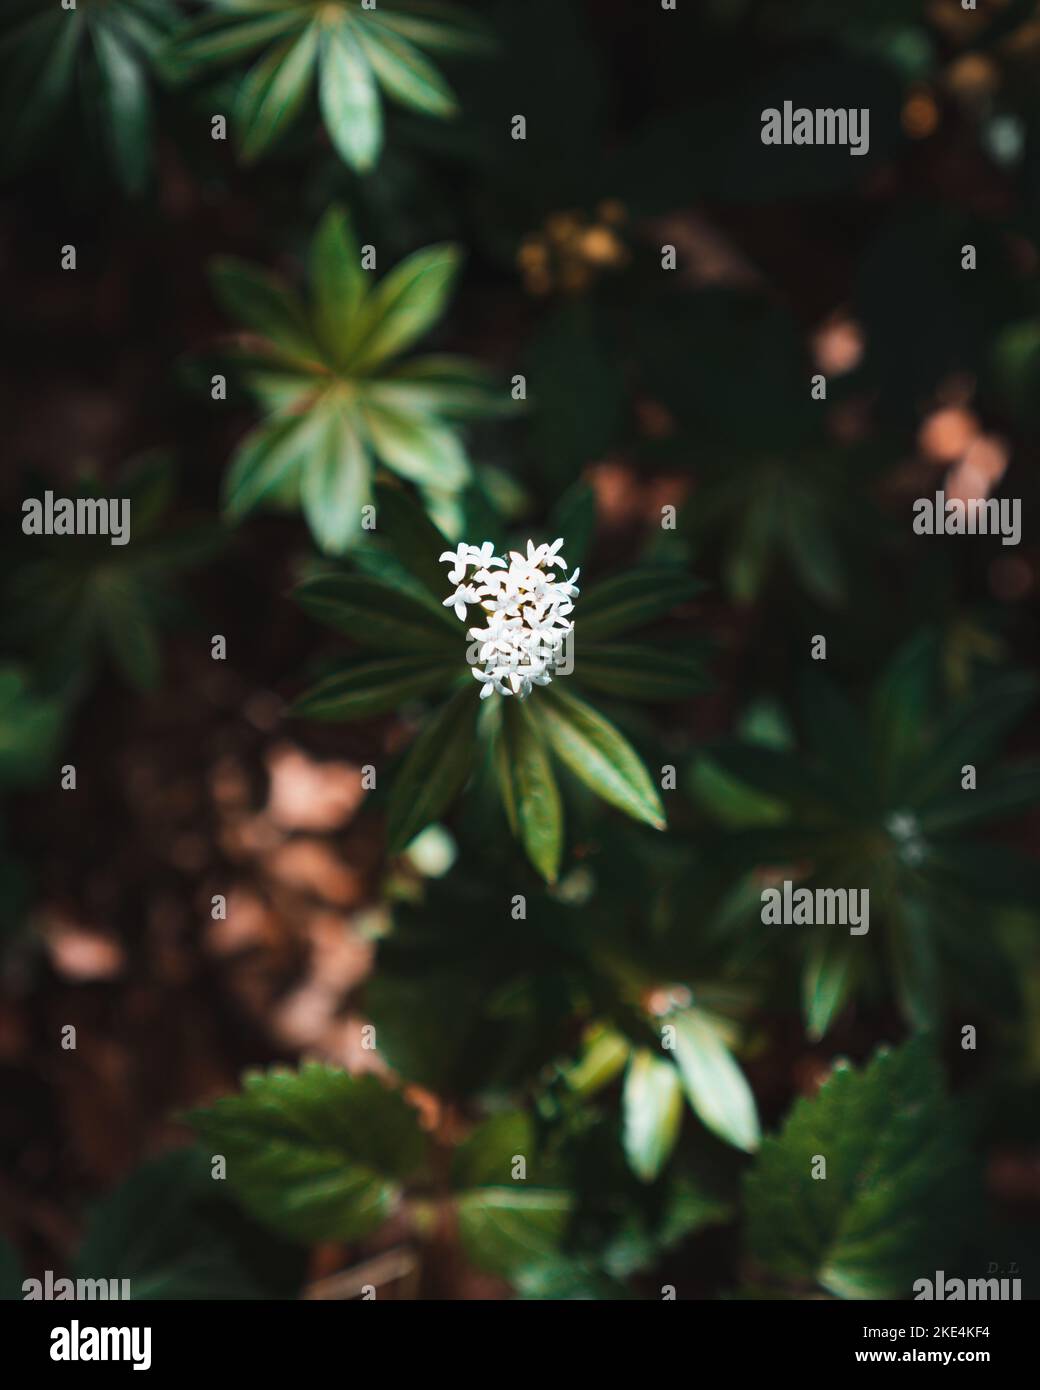 A flat lay shot of a white Woodruff in a garden, with four petals in a star-like configuration and cream-colored stamens, surrounded by green leaves Stock Photo